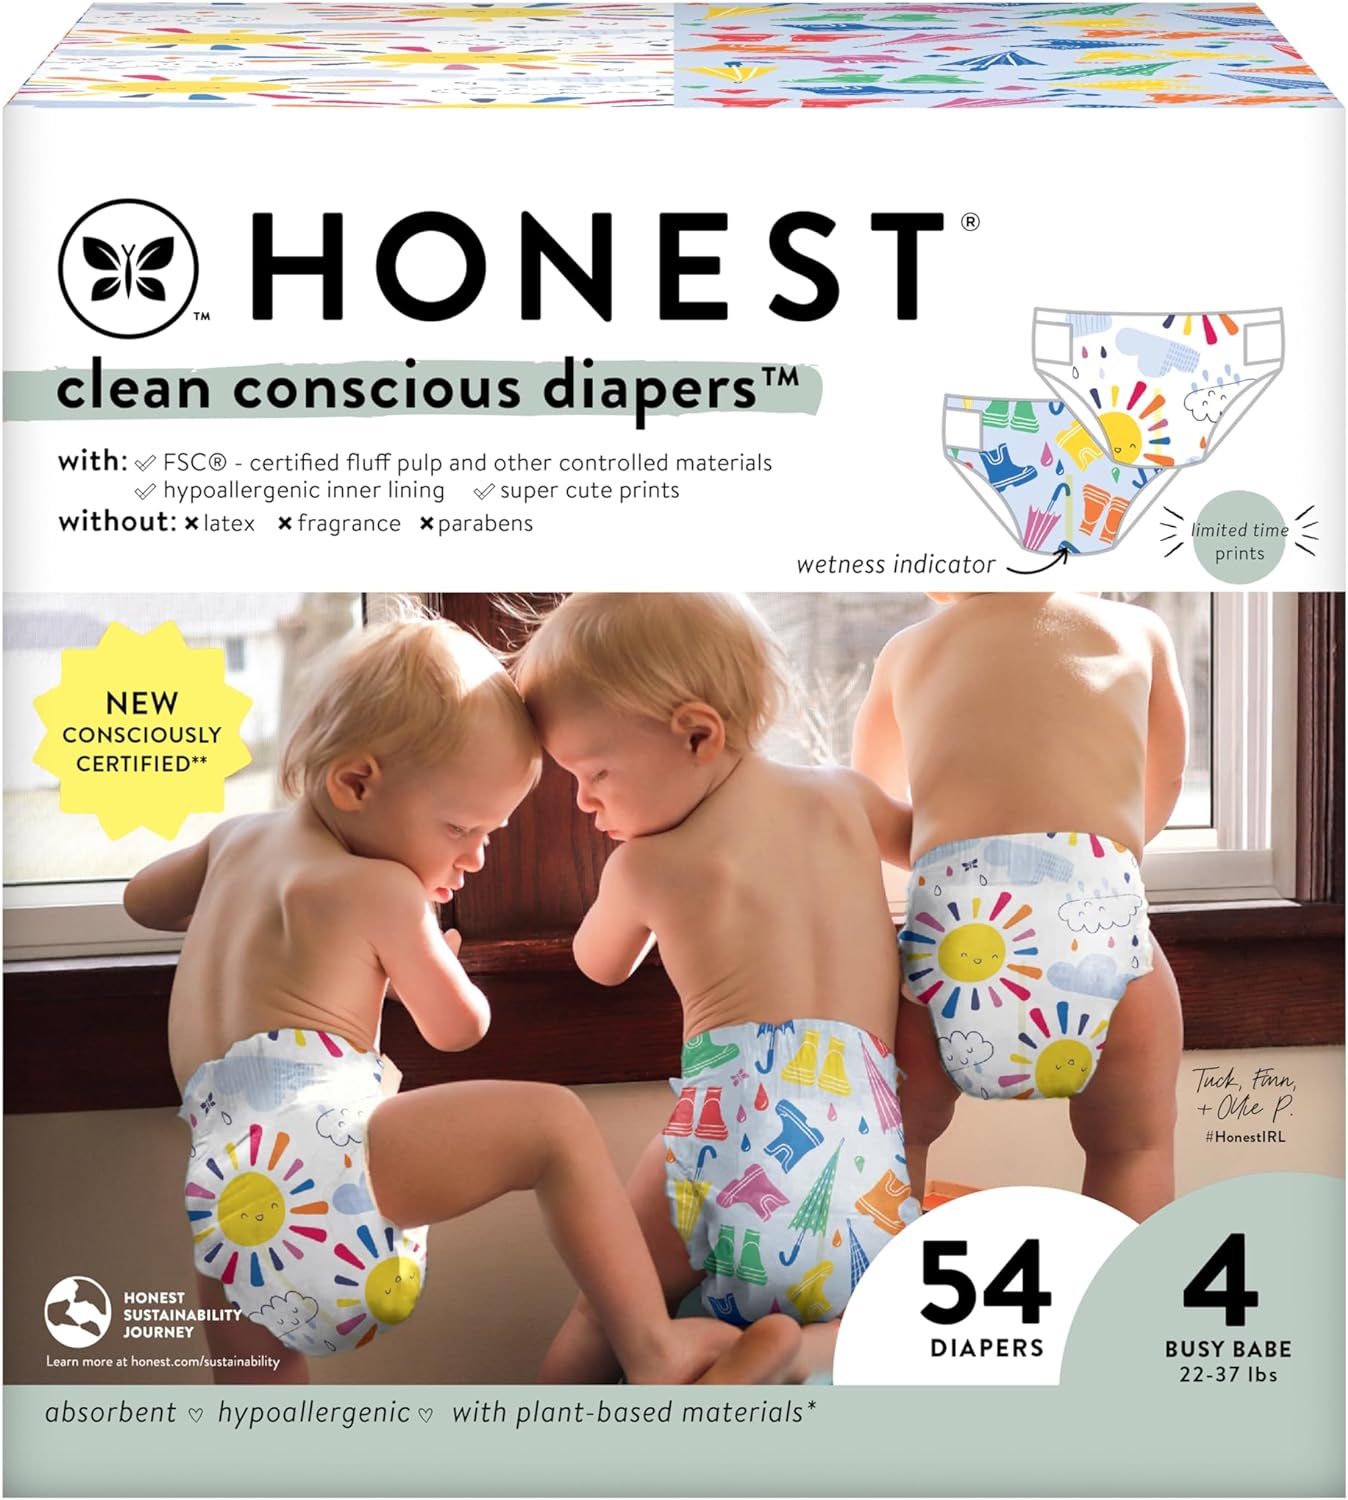 The Honest Company Clean Conscious Diapers | Plant-Based, Sustainable | Limited Edition Prints | Club Box, Size 4 (22-37 lbs), 54 Count